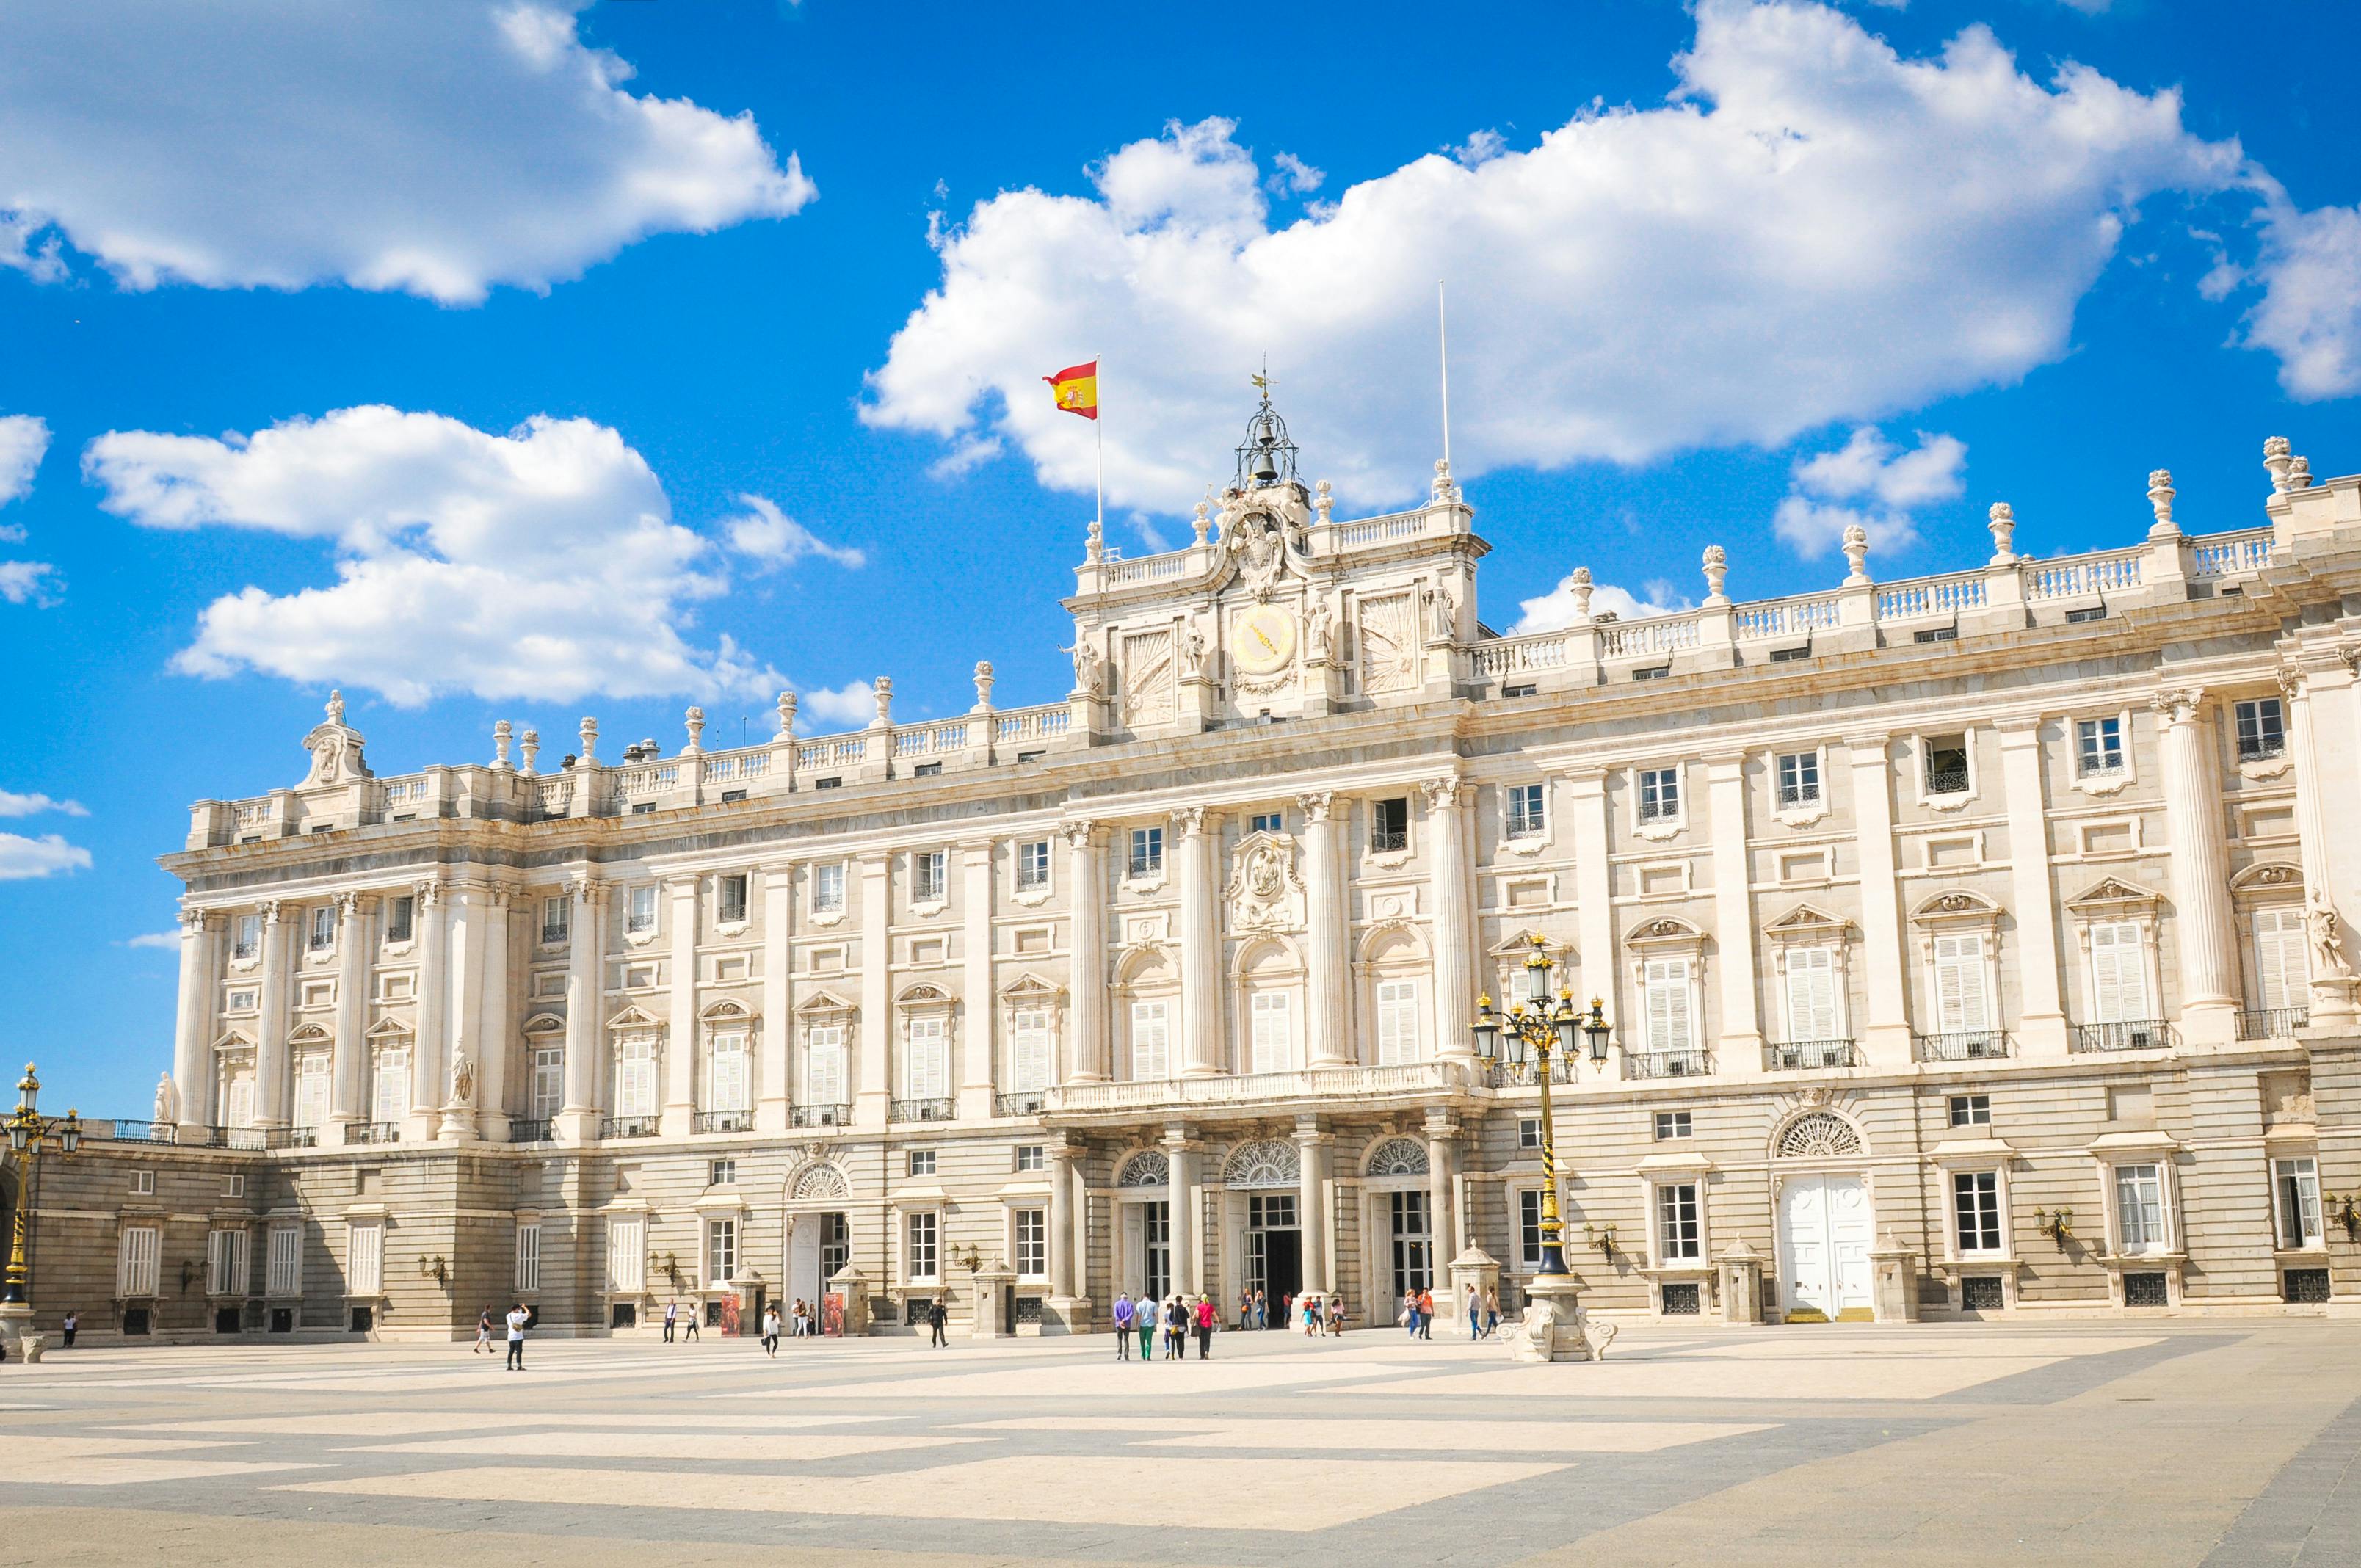 Royal Palace of Madrid guided tour with skip-the-line tickets